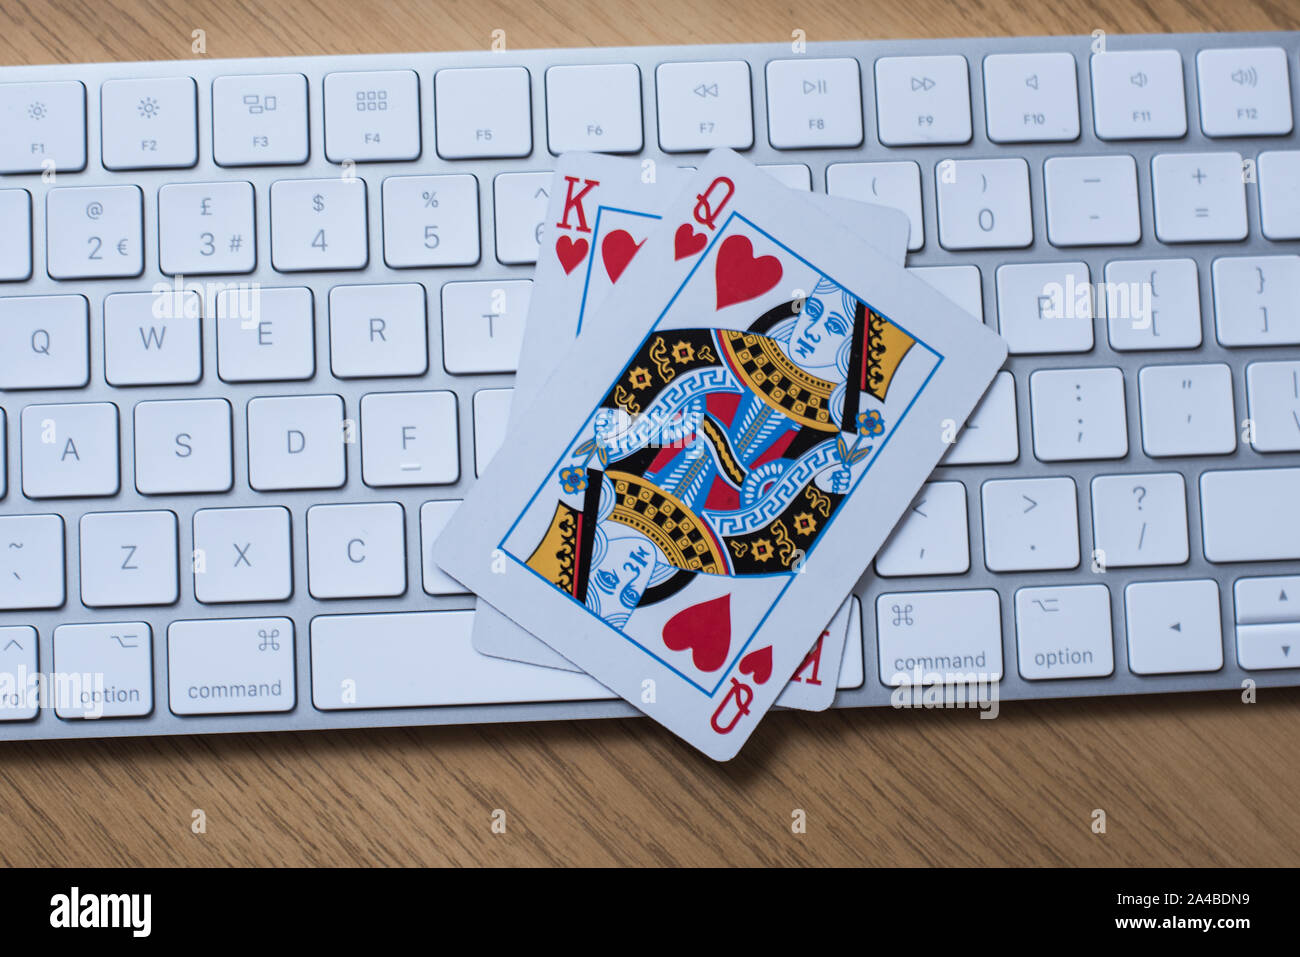 Online gambling and poker play concept with keyboard on a table with King and queen cards Stock Photo